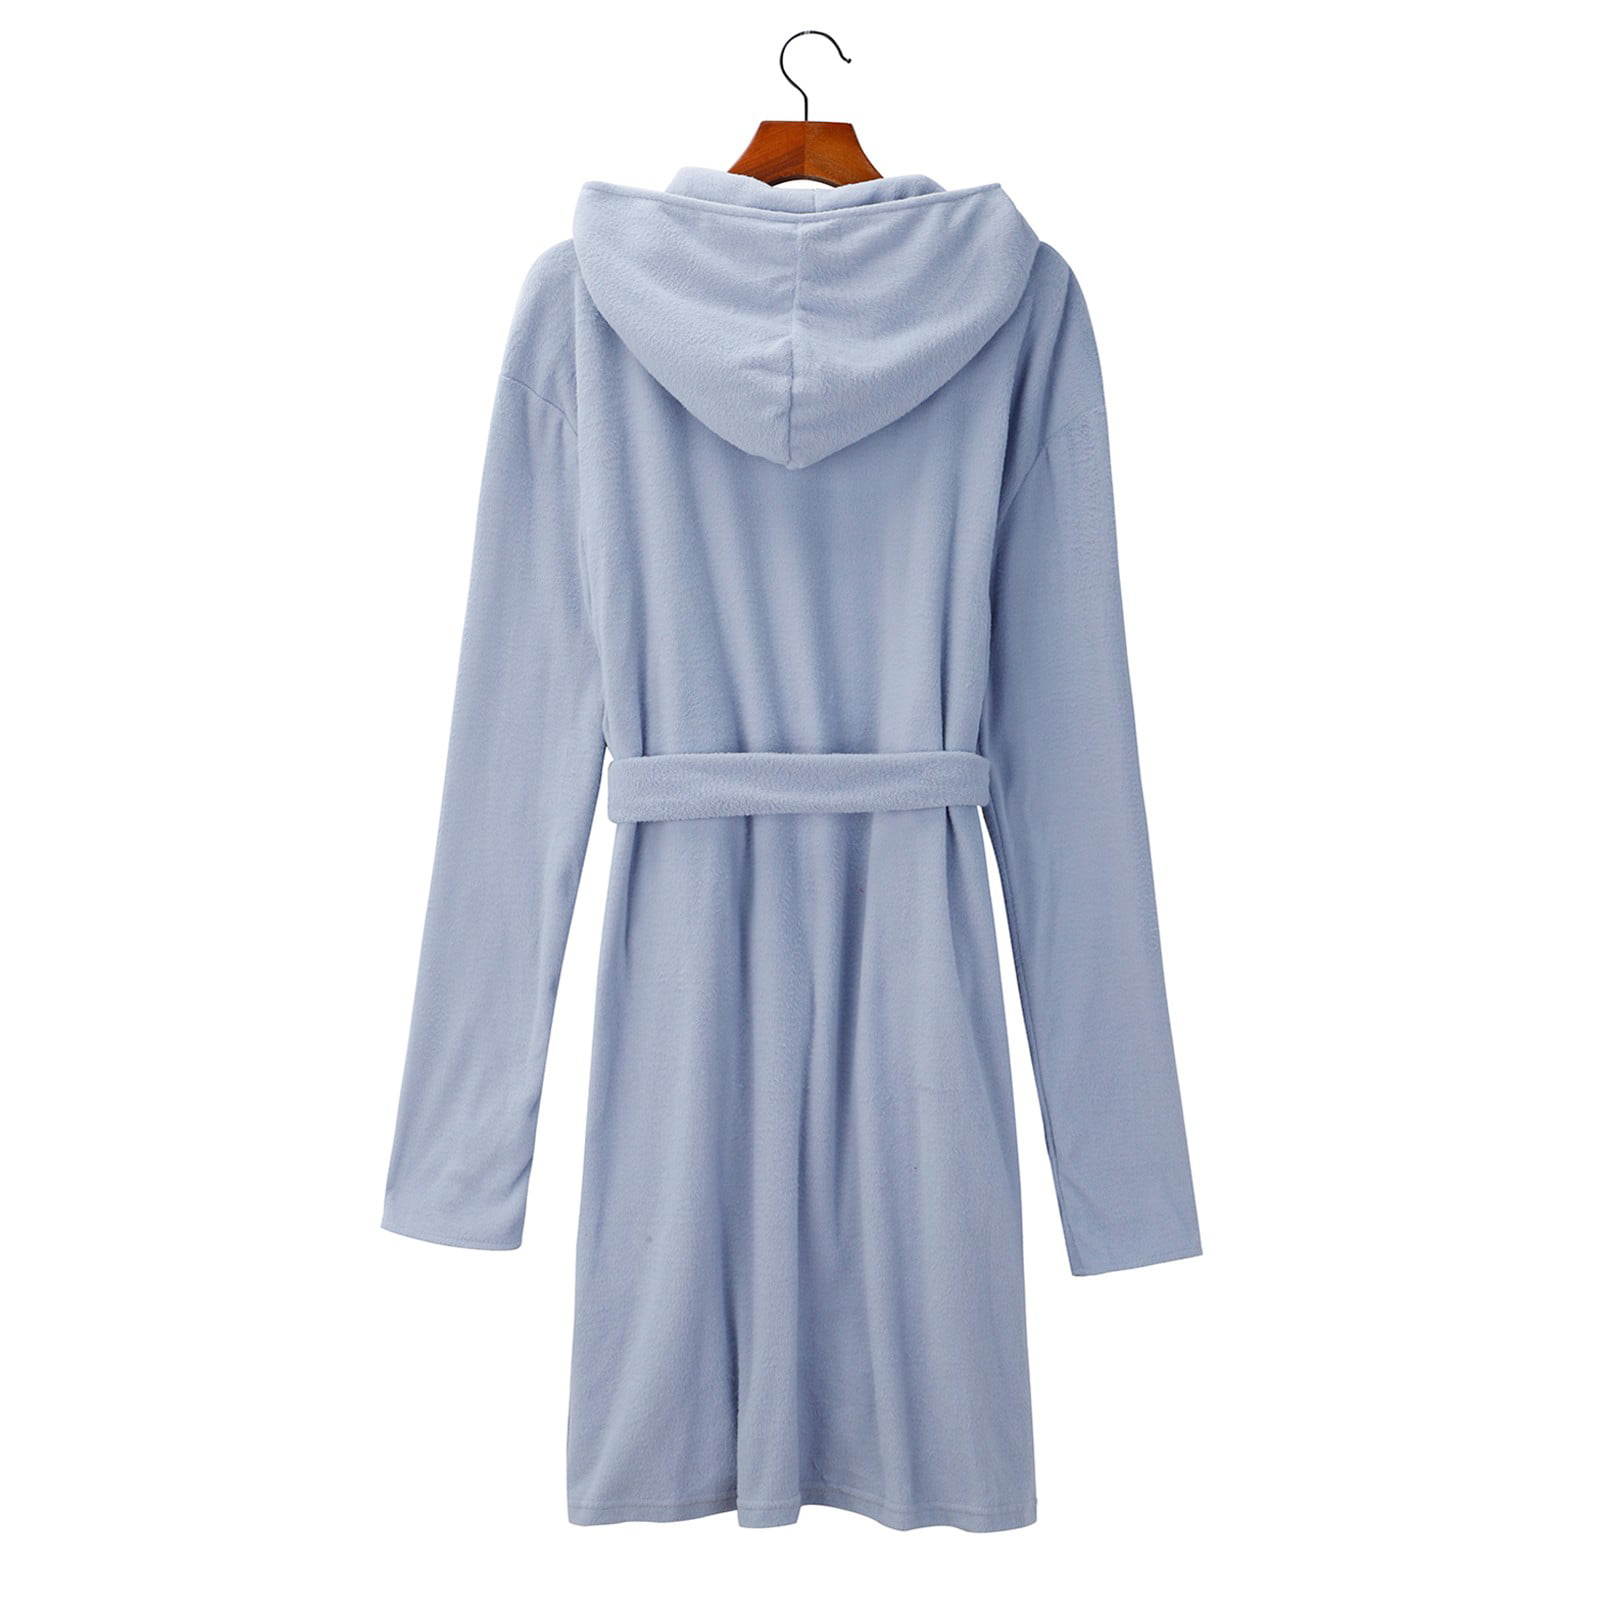 Shpwfbe Pajamas For Women Robes For Women Hooded Bath Lightweight Soft  Plush Long Flannel Sleepwear Hooded Bath Plush Long